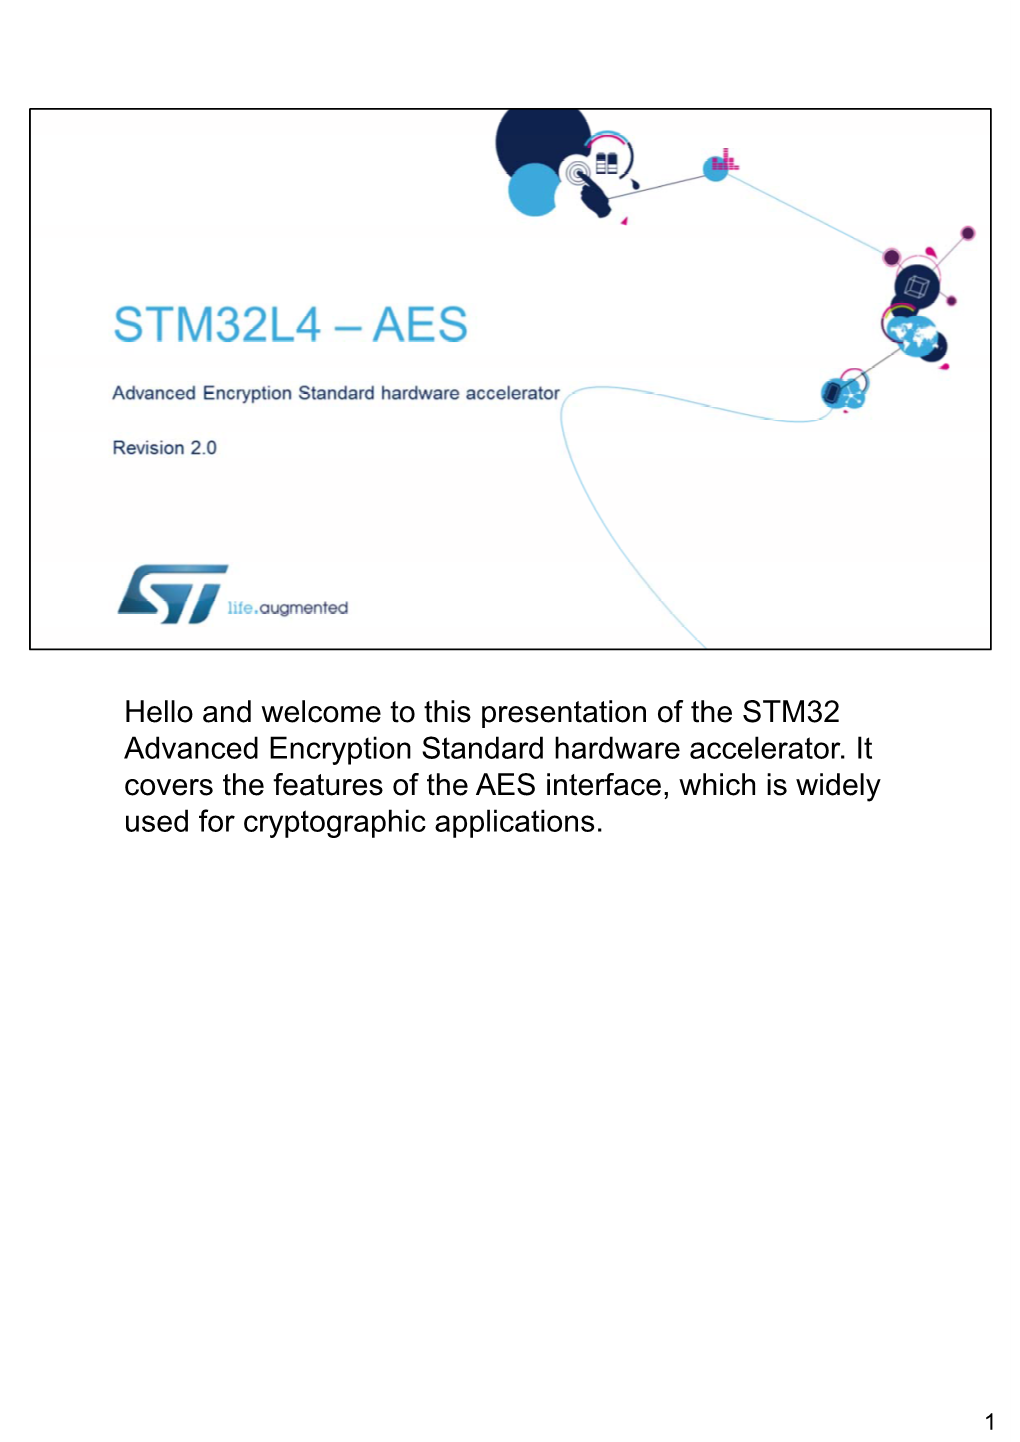 Hello and Welcome to This Presentation of the STM32 Advanced Encryption Standard Hardware Accelerator